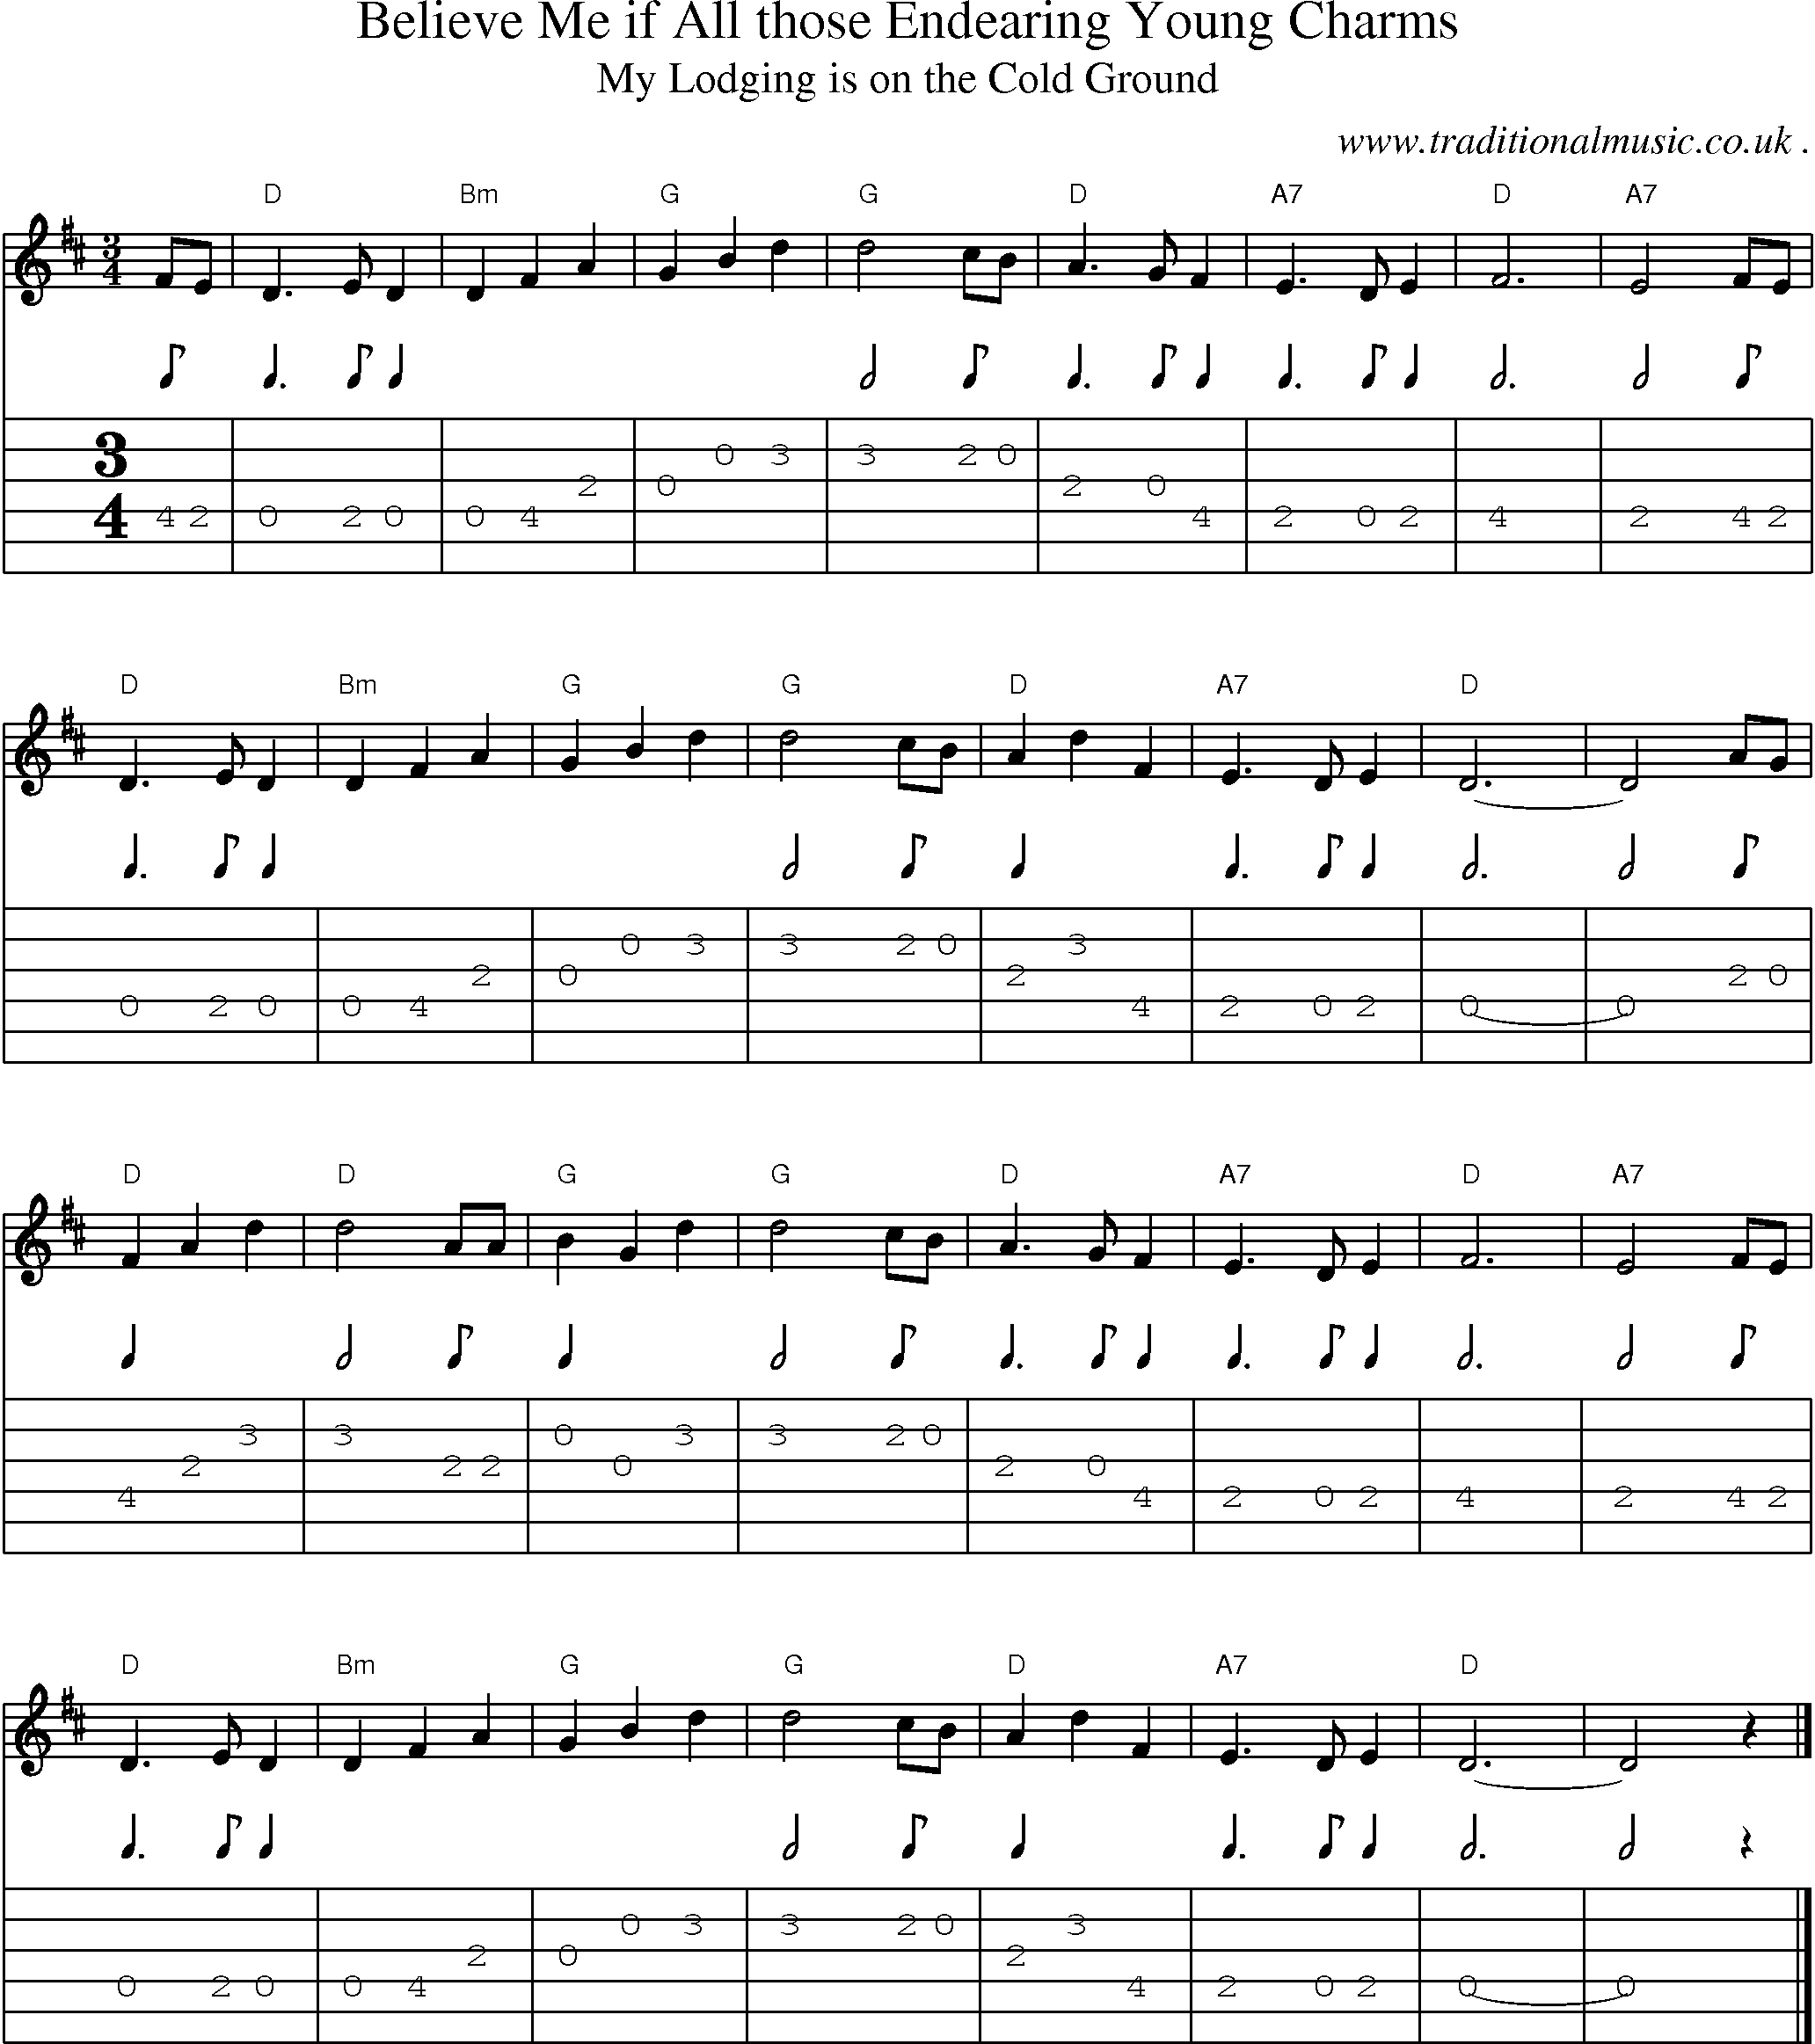 Music Score and Guitar Tabs for Believe Me if All those Endearing Young Charms